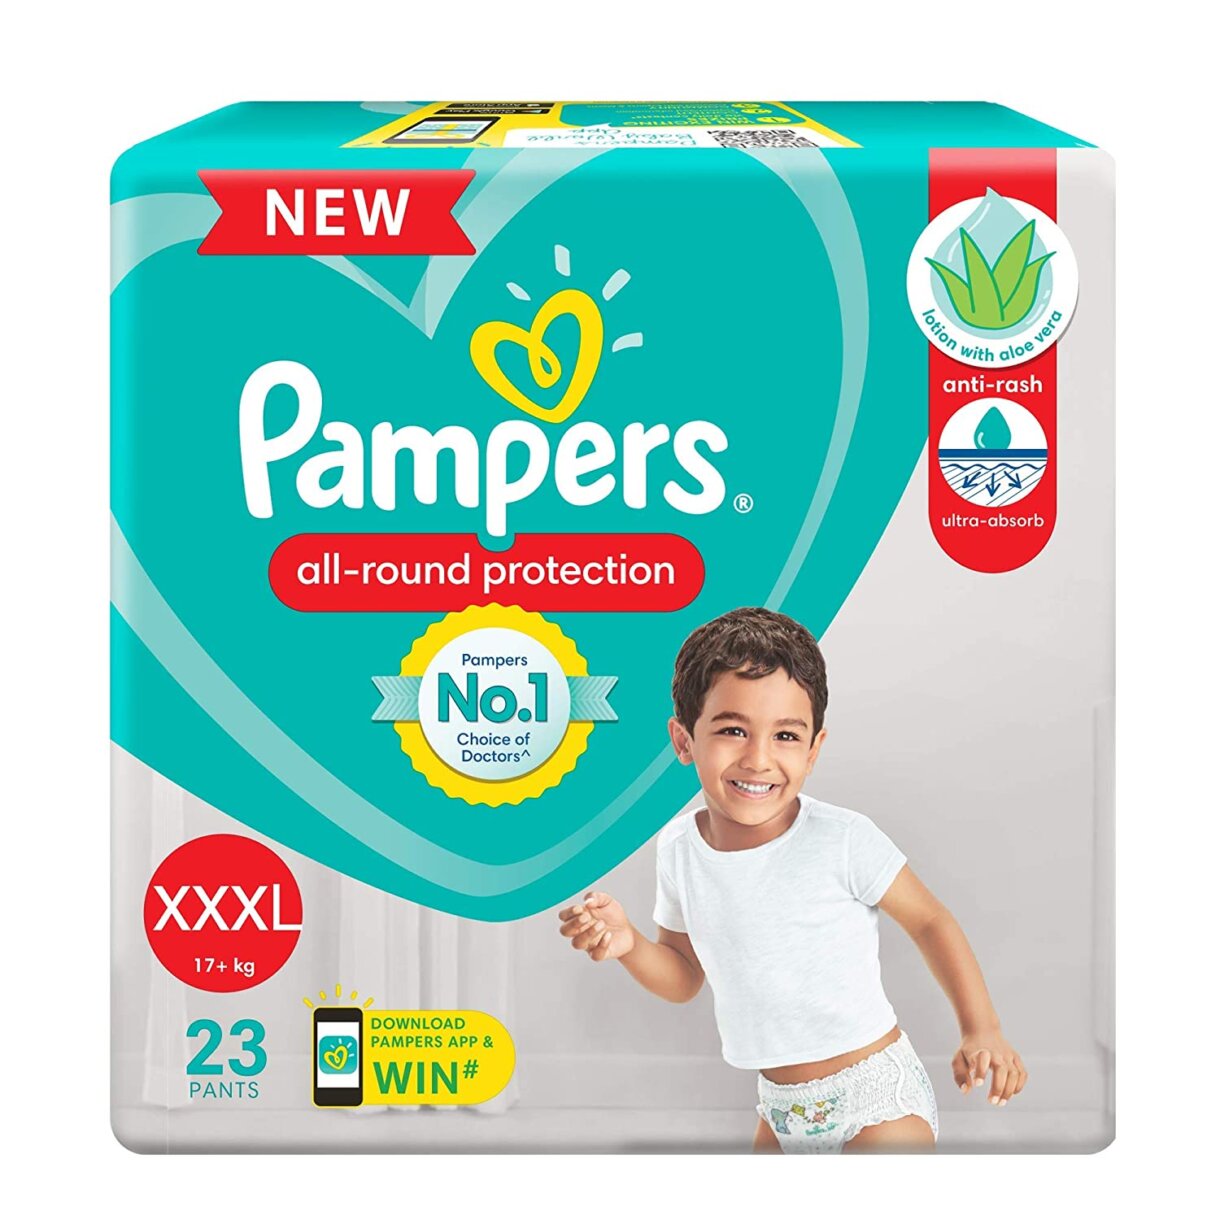 Pampers All round Protection Pants, baby diapers (XXXL)